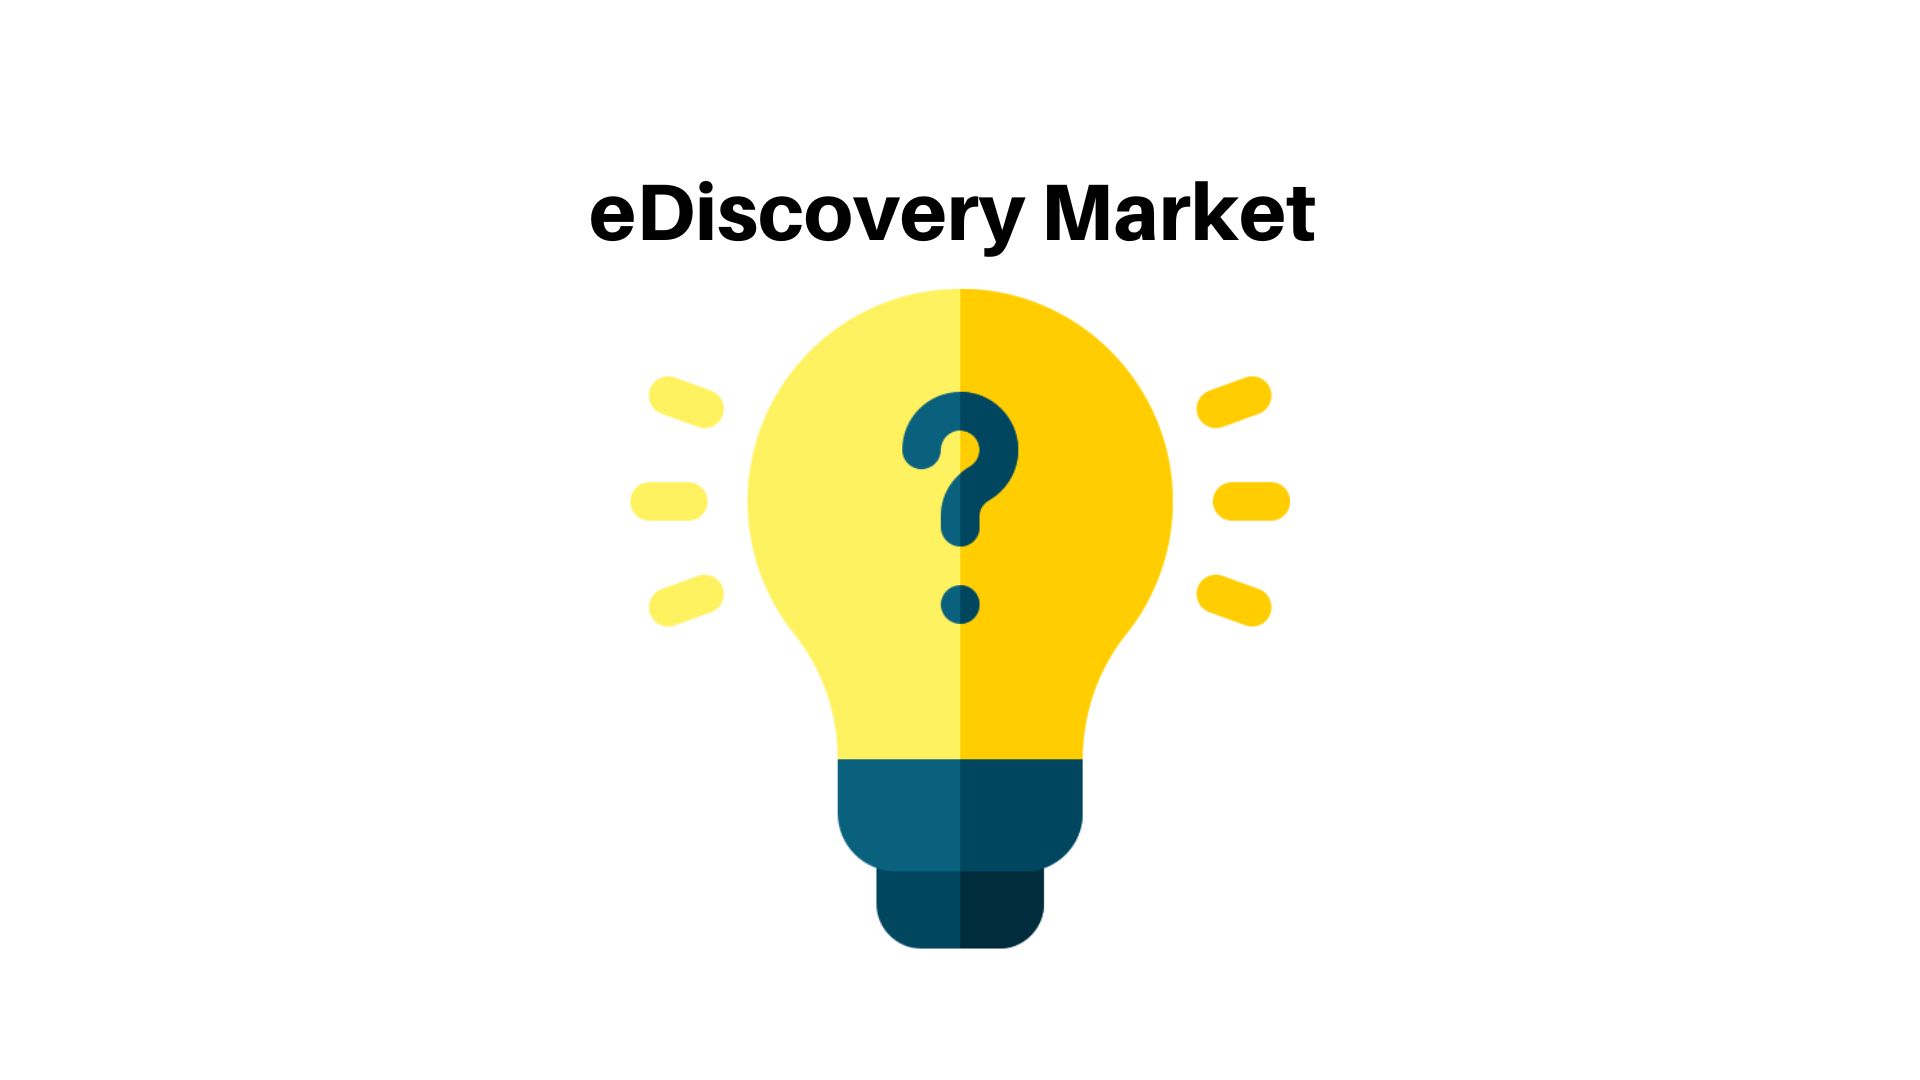 eDiscovery Market [+CAGR 10.7%] to Cross USD 44.11 Bn in 2032